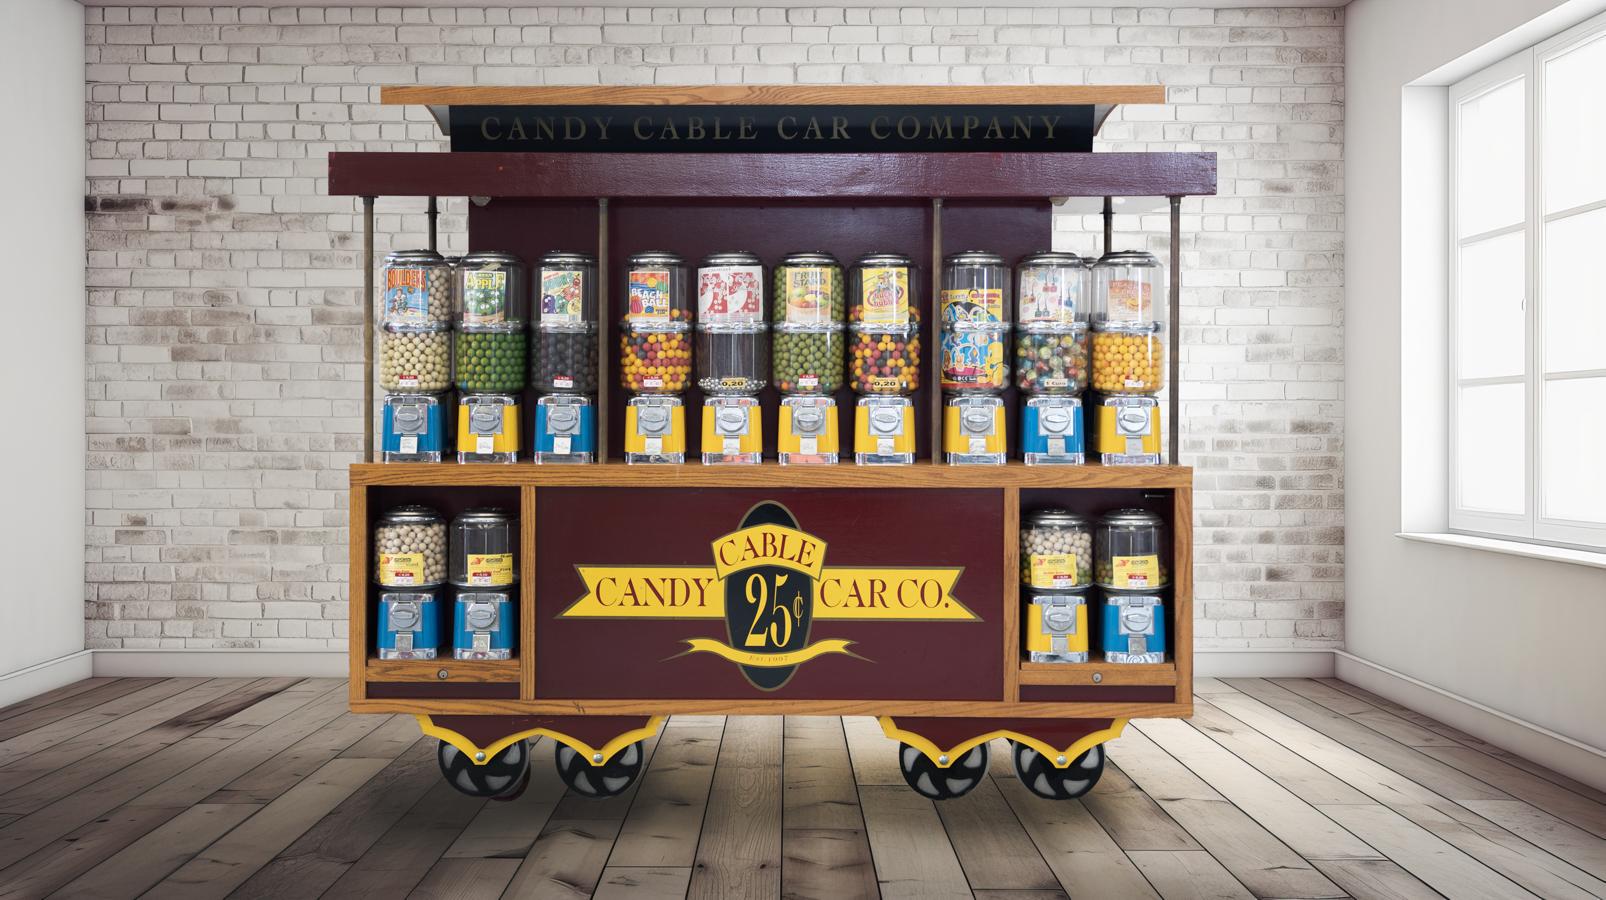 Candy cable car nr 38 dispenser, 2000 - wheeled candy vending machine
Style
Modernist
Periodo del design
1990 – 1999
Production Period
2000 - 2009
Year Manufactured
2000
Country of Manufacture
United